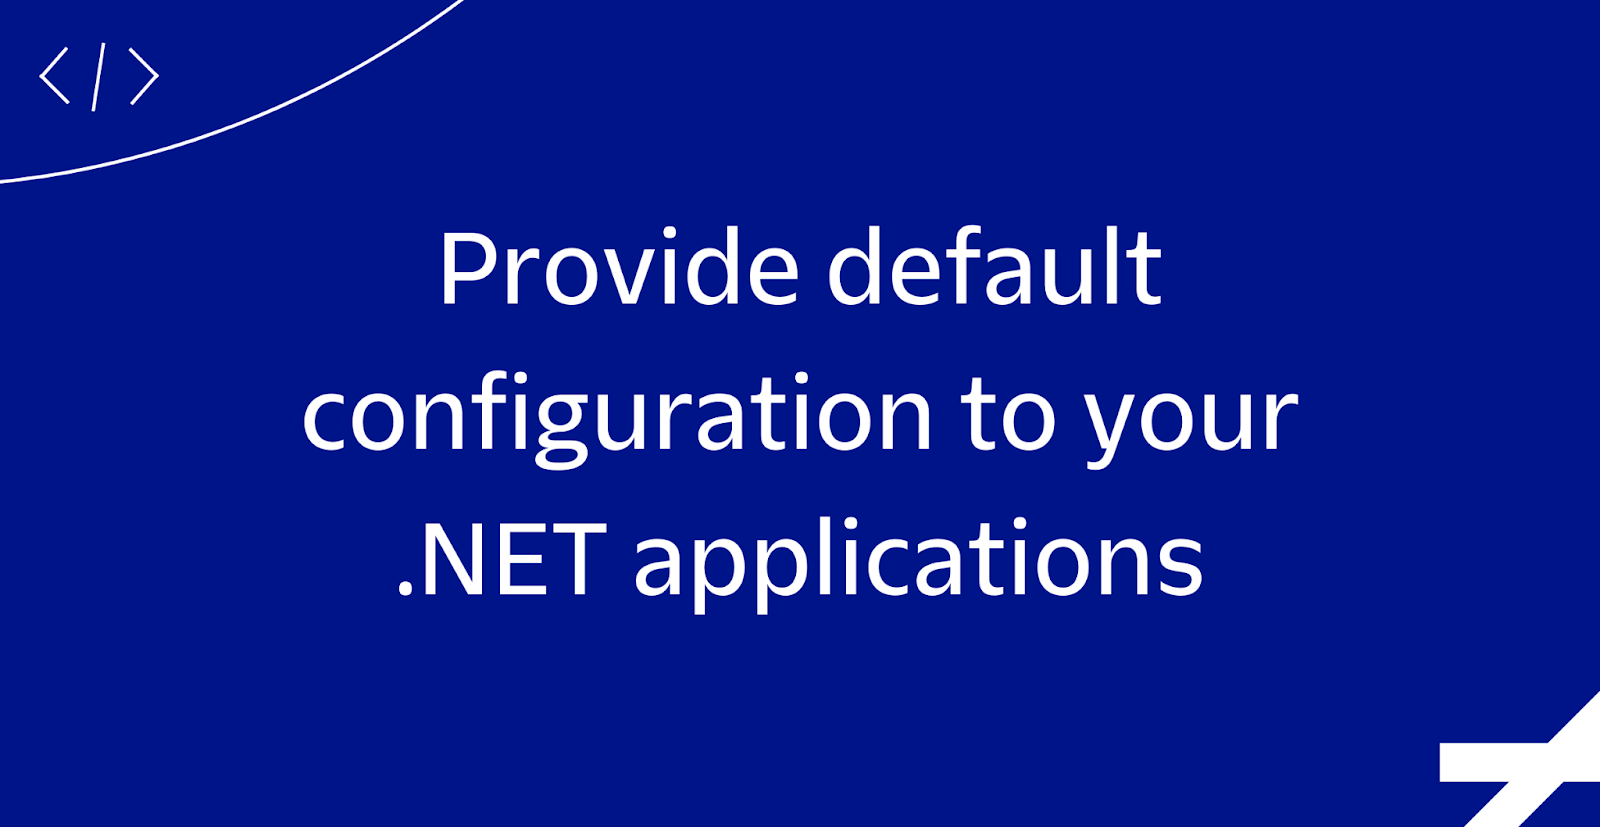 Provide default configuration to your .NET applications